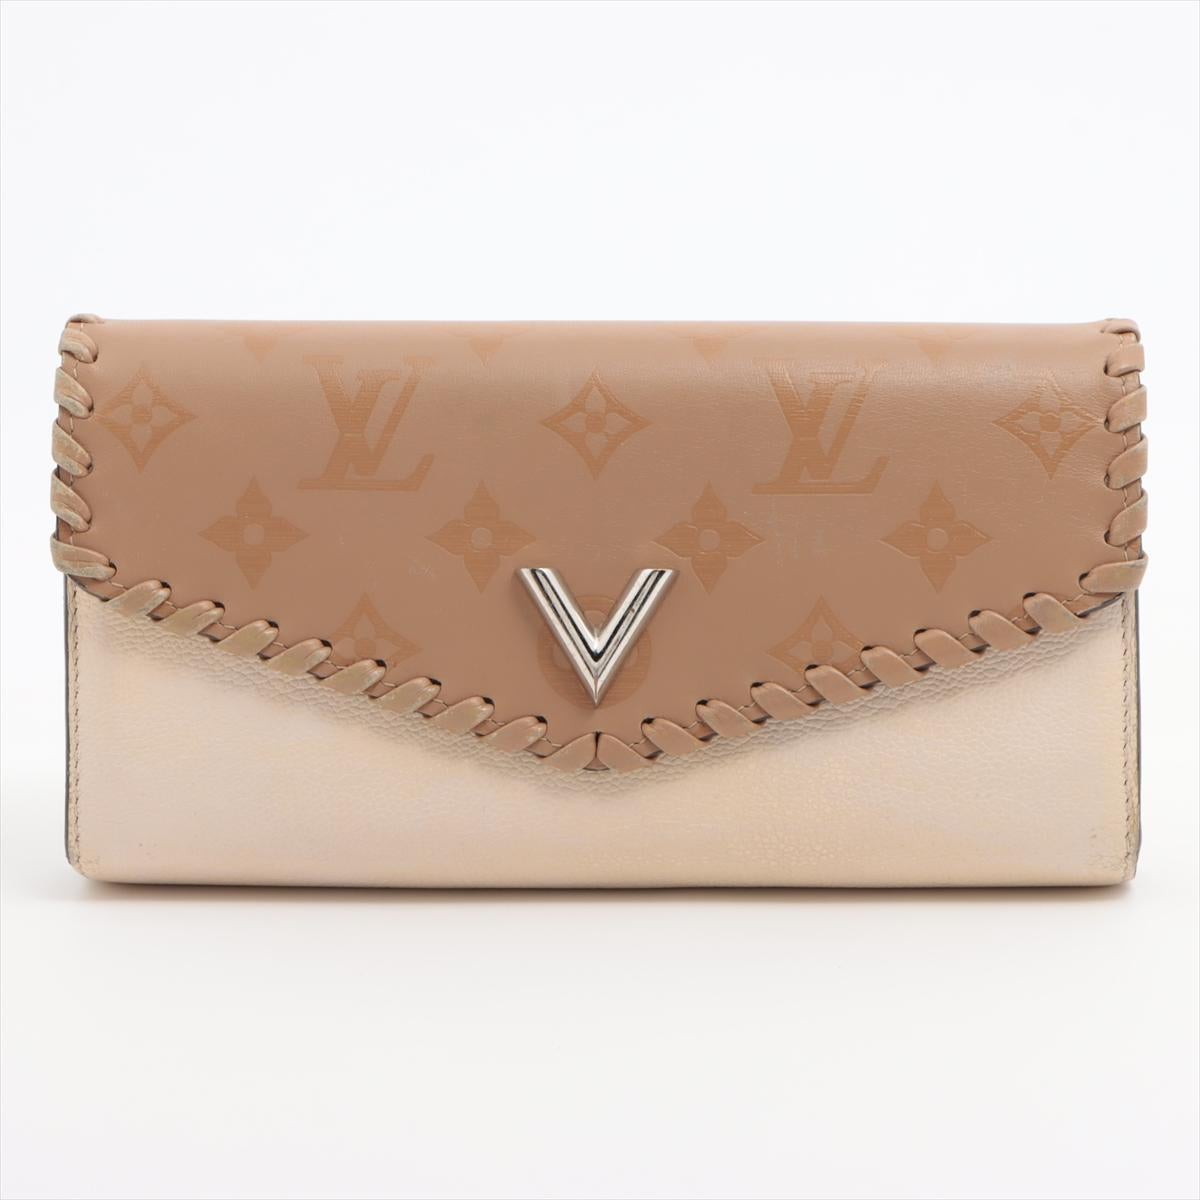 The Louis Vuitton Monogram Glace Envelope Wallet in Beige and Brown is an elegant and sophisticated accessory that combines luxury with functionality. Crafted from the iconic Monogram canvas, the wallet features a glace finish that adds a subtle